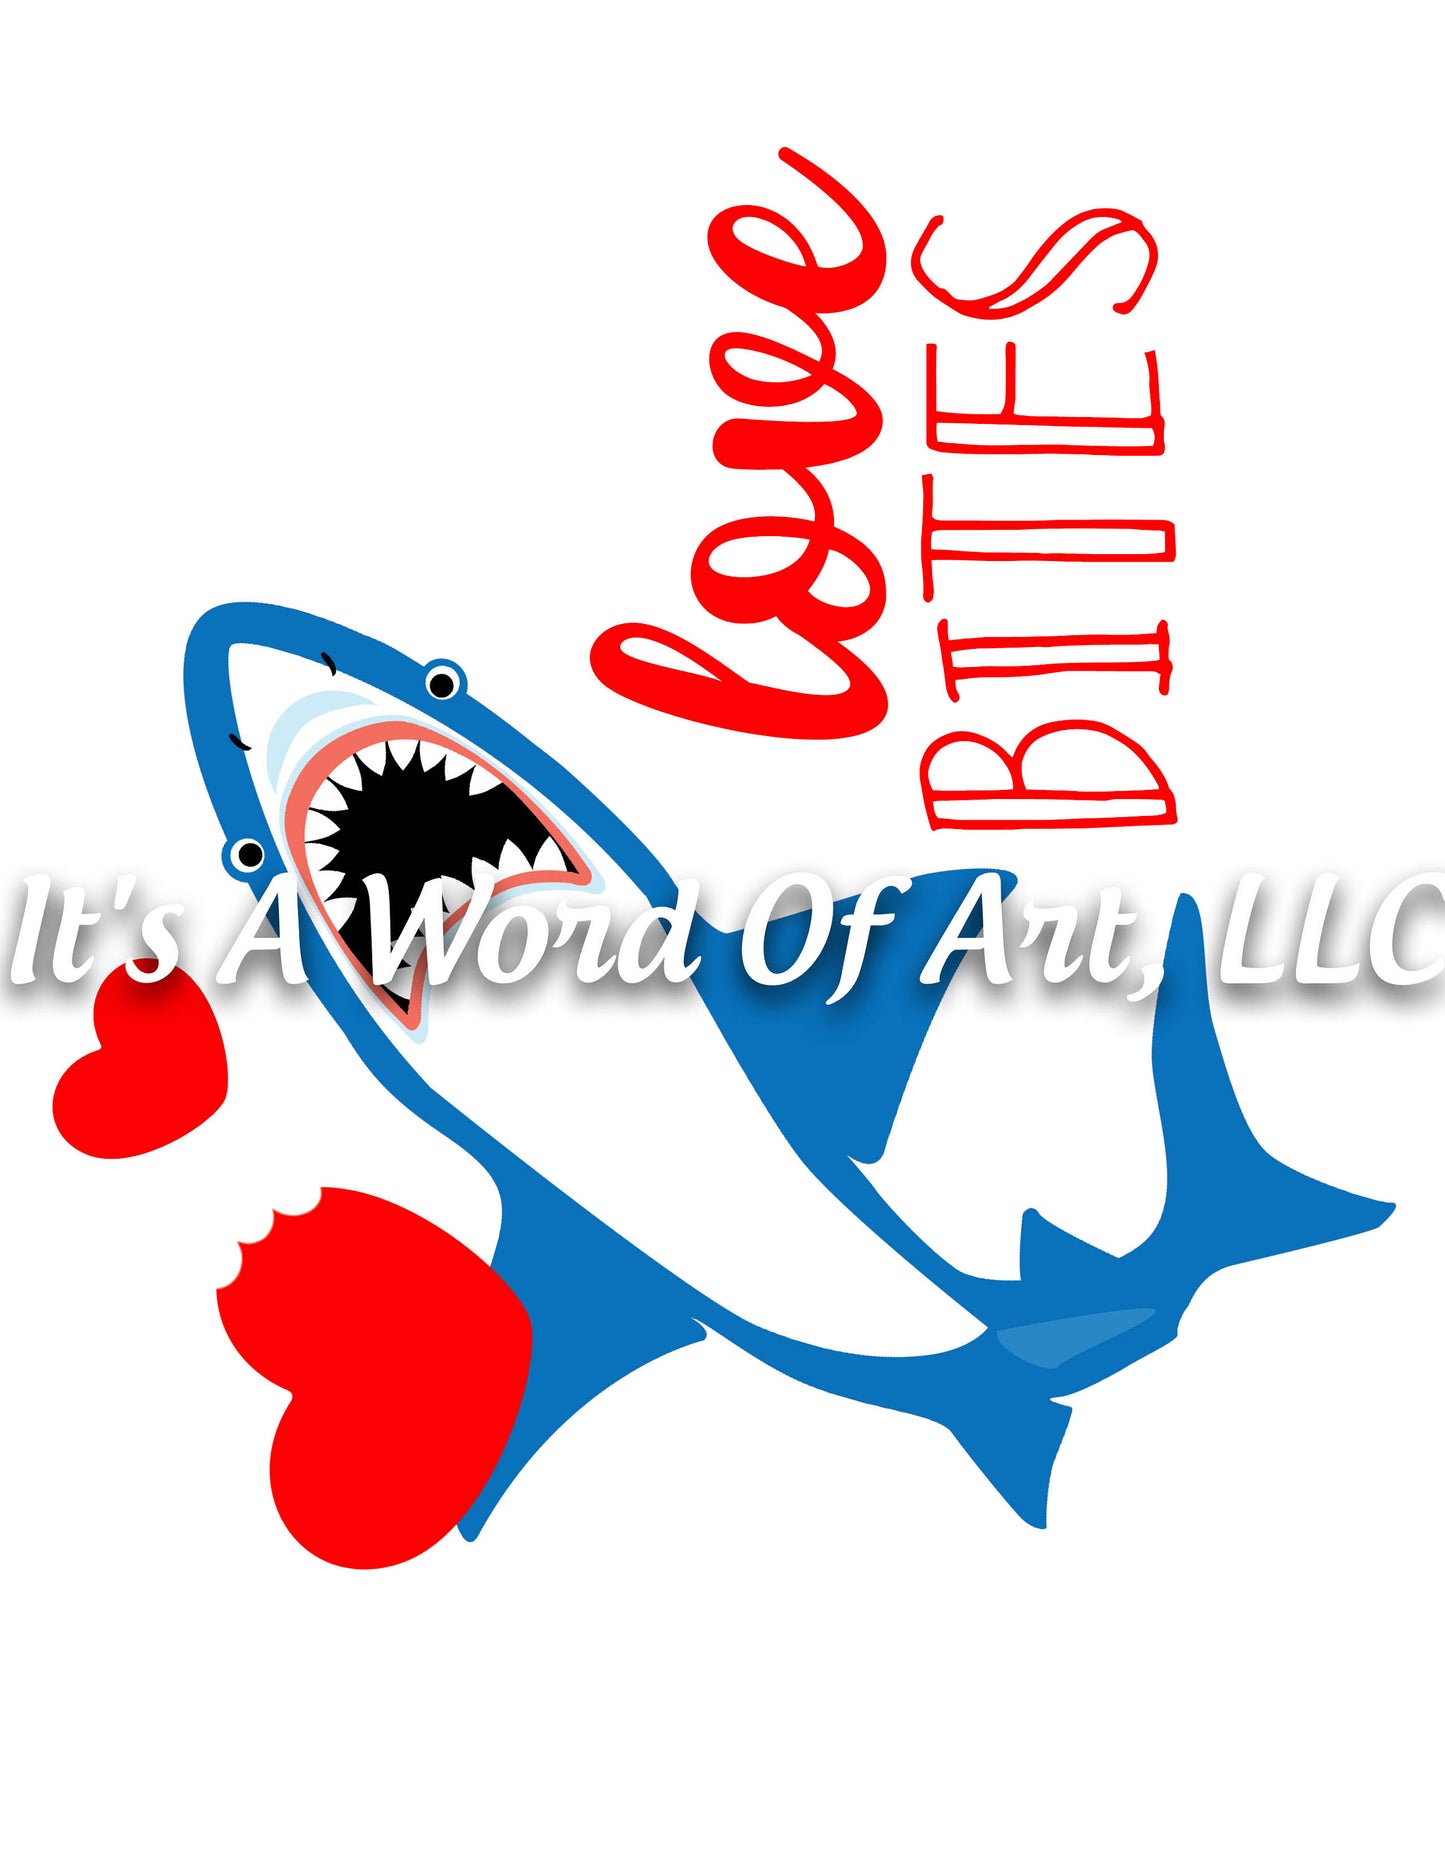 Valentines Day 95 - Love Bites Shark Cute Shirt - Sublimation Transfer Set/Ready To Press Sublimation Transfer/Sublimation Transfer